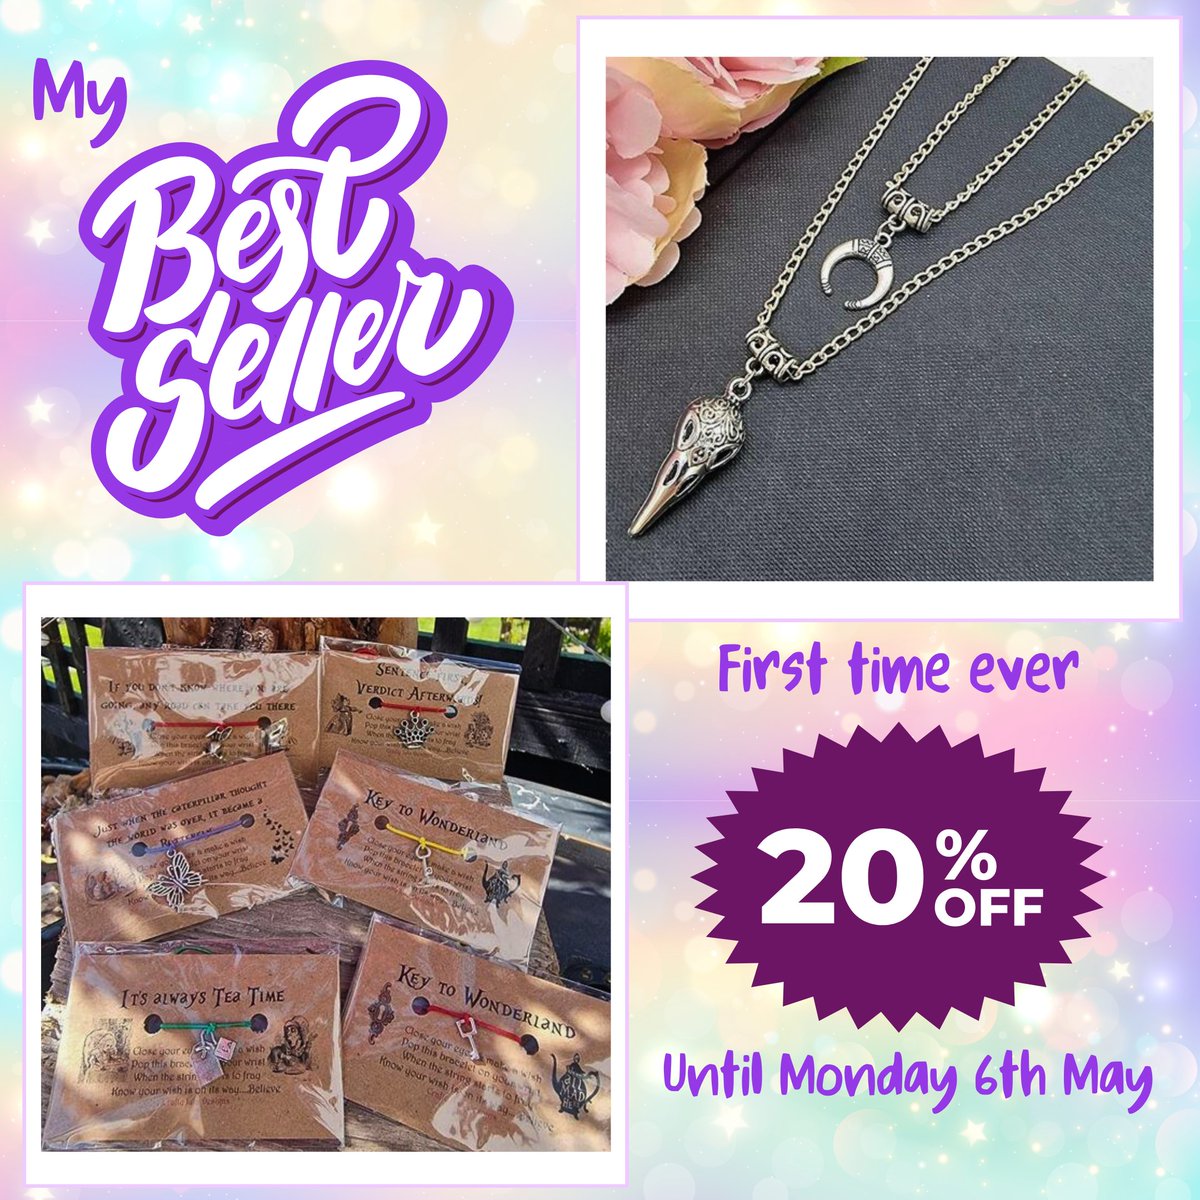 For the first time I am offering 20% OFF of my Best Sellers, check it out here

craftyjujudesigns.etsy.com

Offer only in until Monday 💜

#smallbusiness #etsy #etsysale #bankholidaysale #bankholiday #etsyuk
instagram.com/p/C6i3DqkMcy4/…